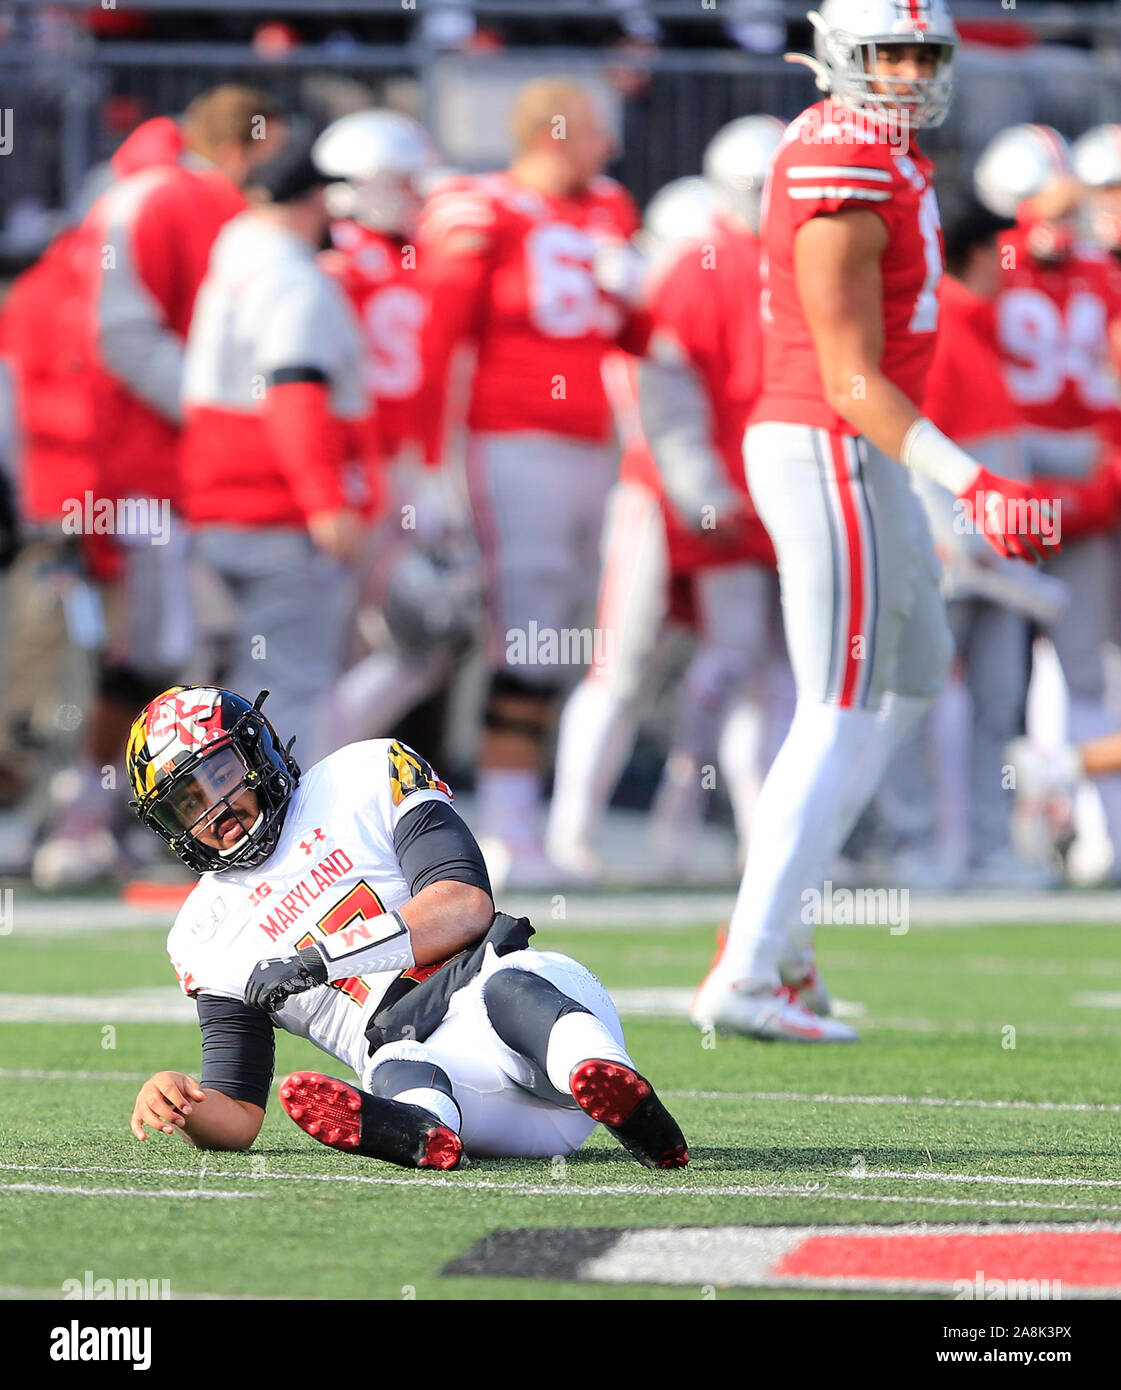 November 9, 2019: Maryland Terrapins quarterback Josh Jackson (17) sits on the ground after being hit by Ohio State Buckeyes defensive lineman Alex Williams (17). Penalty on the play, roughing the passer. during the NCAA football game between the Maryland Terrapins & Ohio State Buckeyes at Ohio Stadium in Columbus, Ohio. JP Waldron/Cal Sport Media Stock Photo